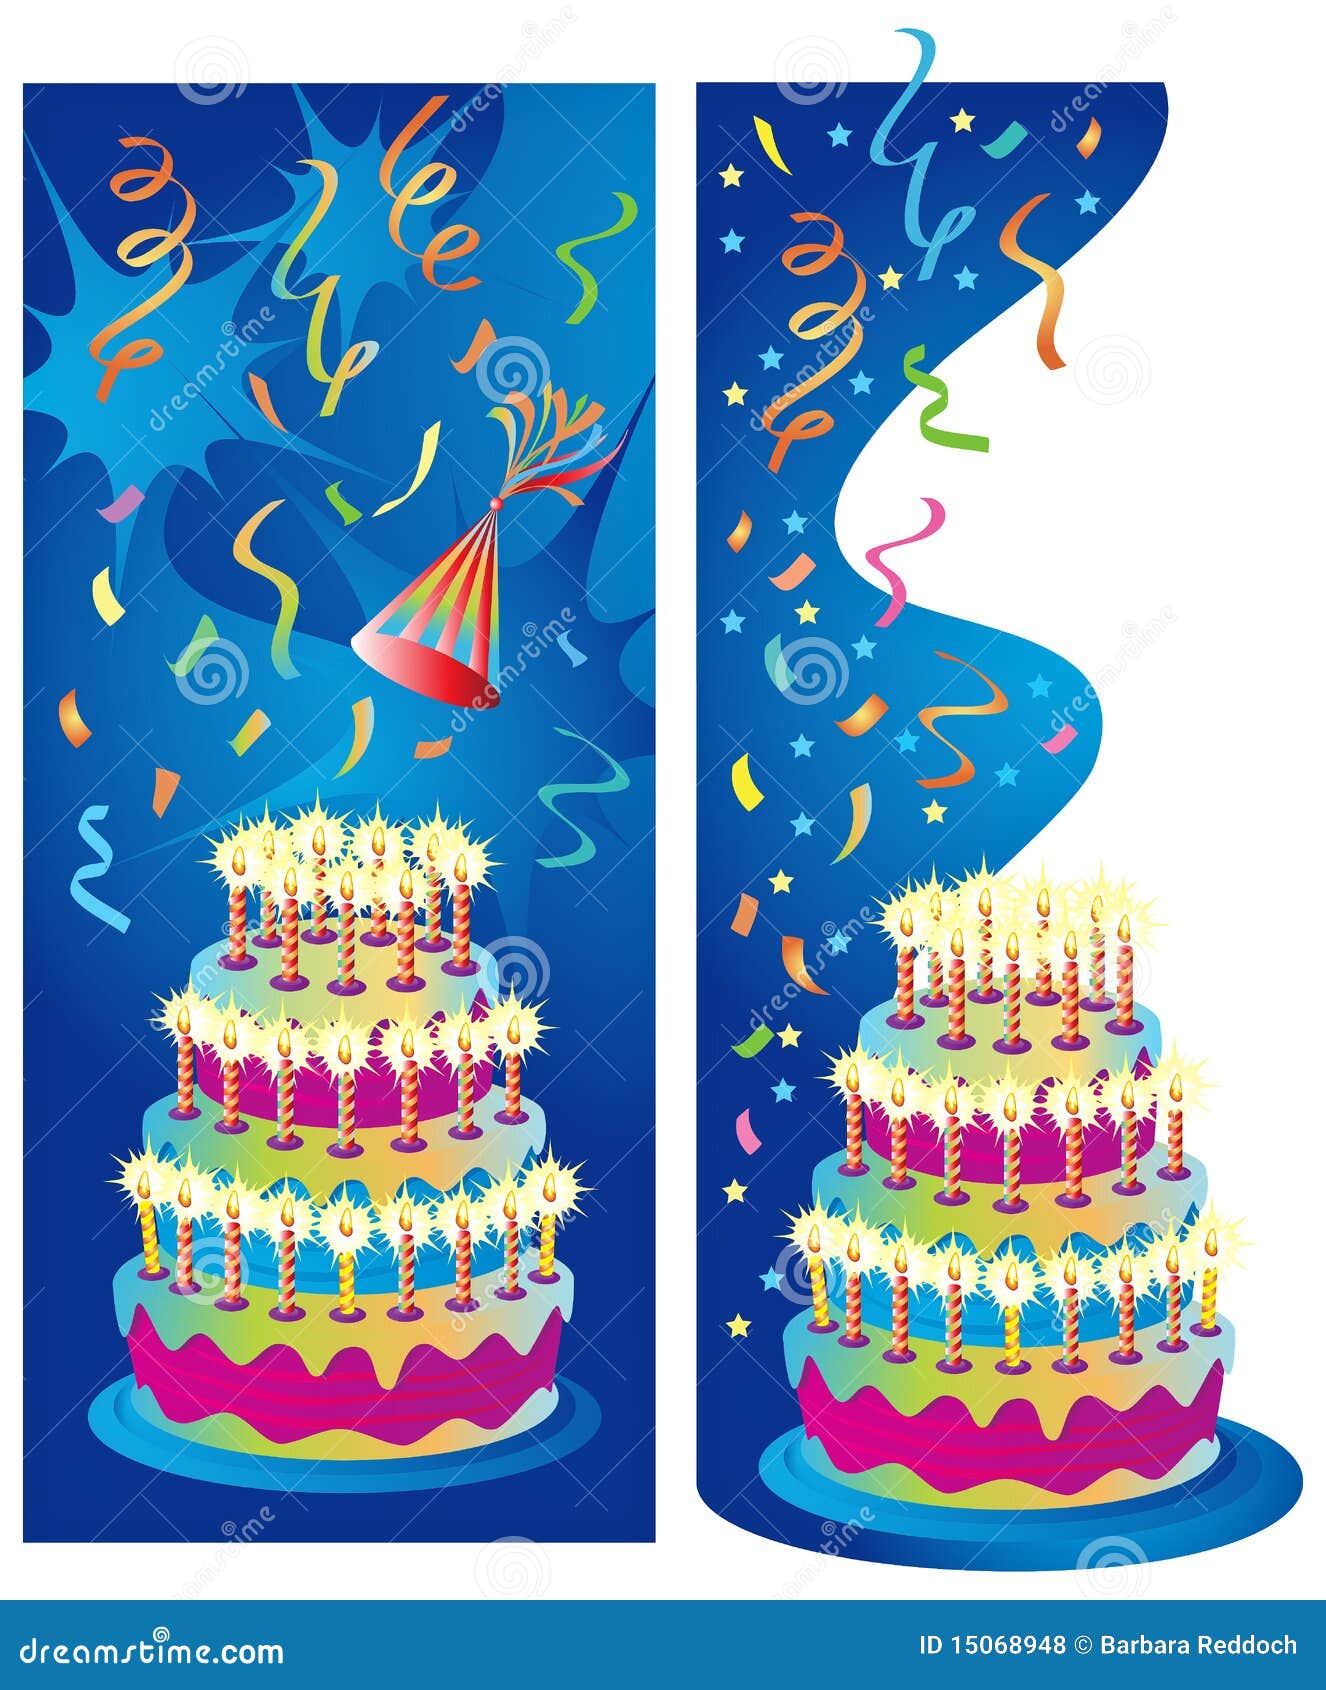 Celebration Party Banners Royalty Free Stock Photos - Image: 15068948